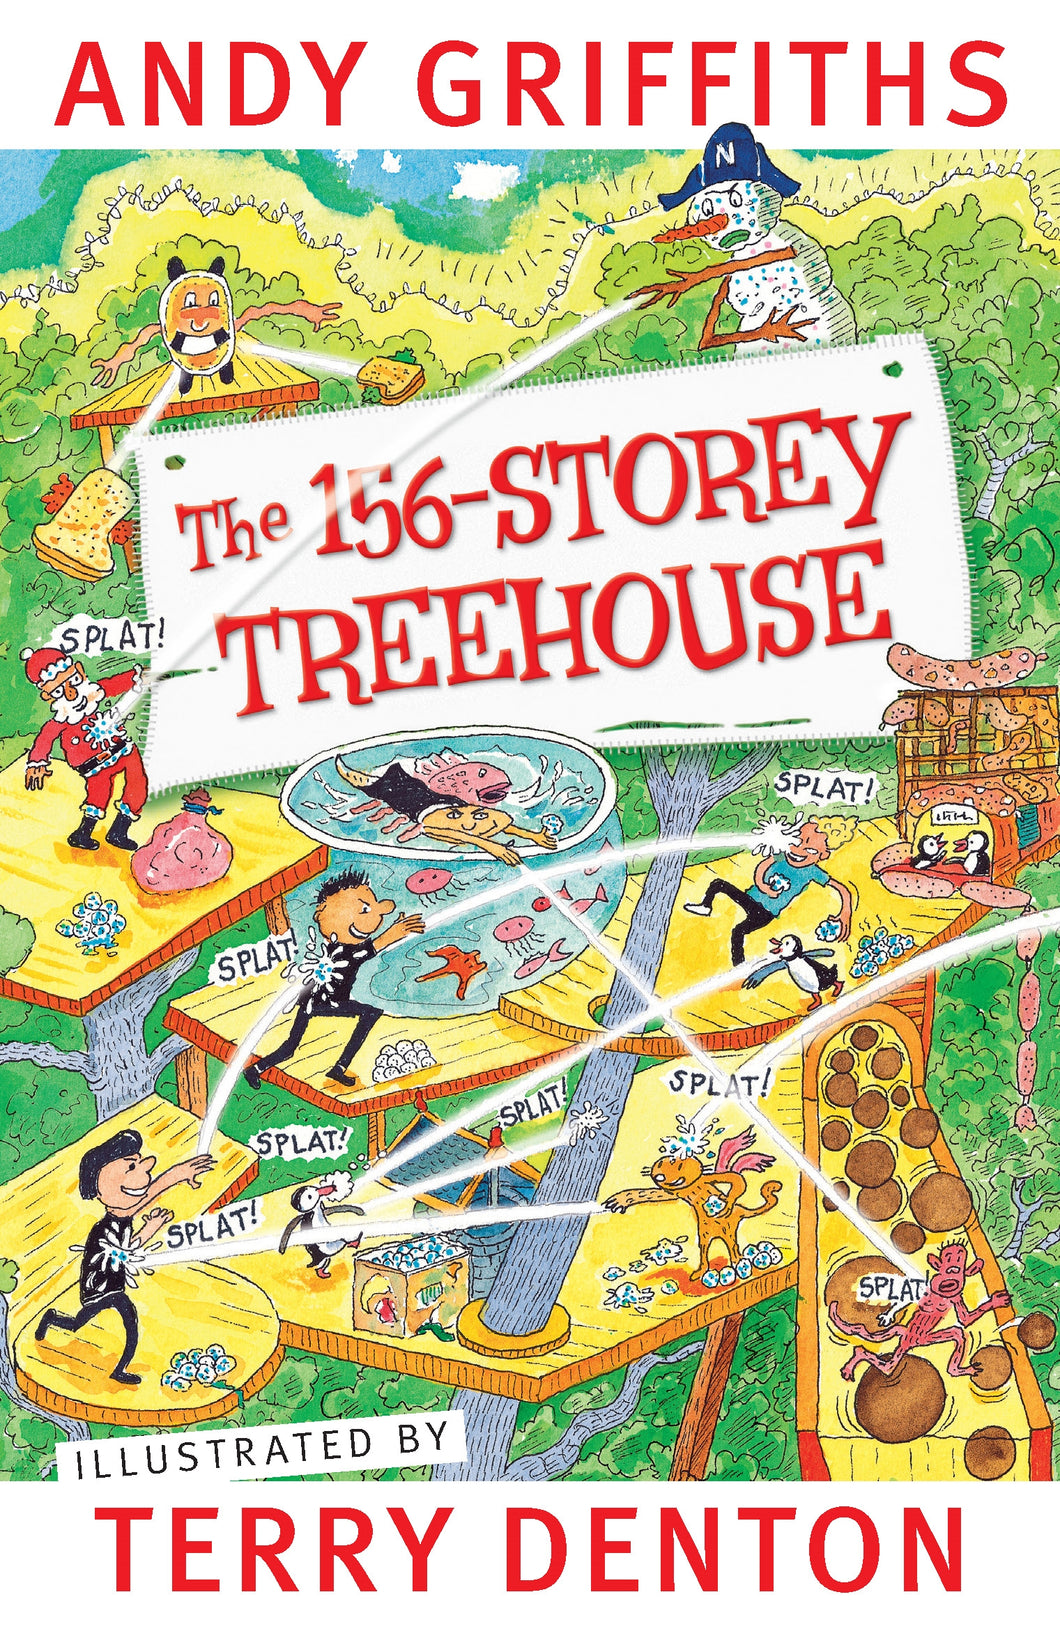 The 156-Storey Treehouse by Andy Griffiths and Terry Denton